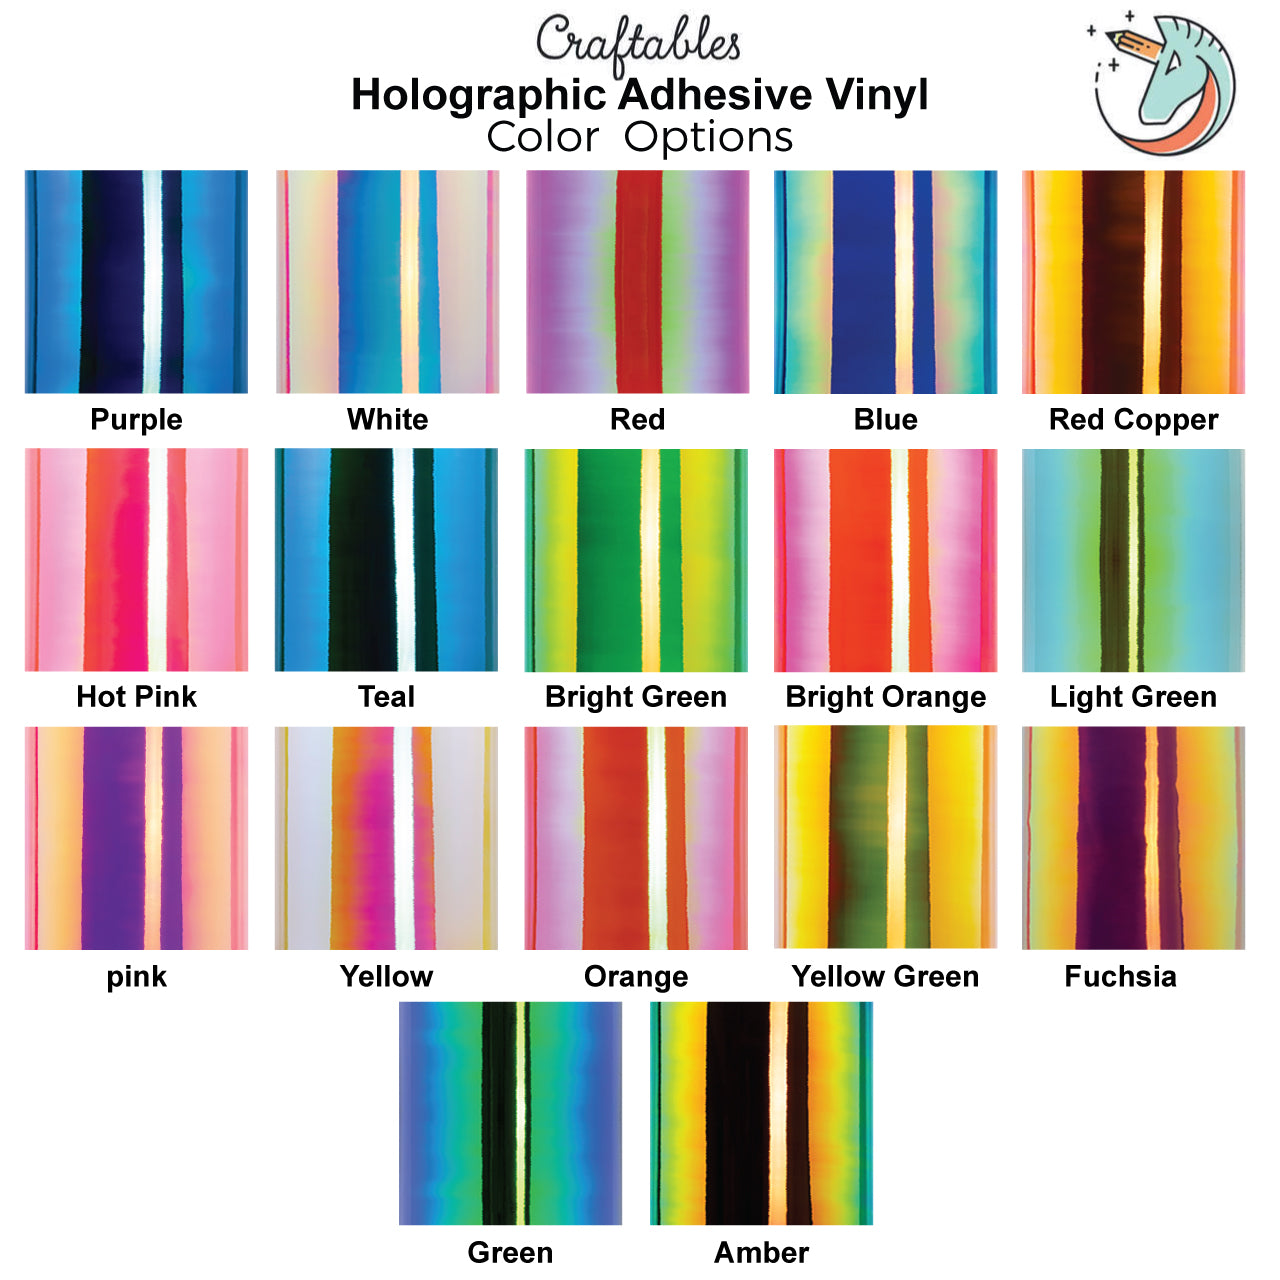 Teal Holographic Adhesive Vinyl Rolls By Craftables